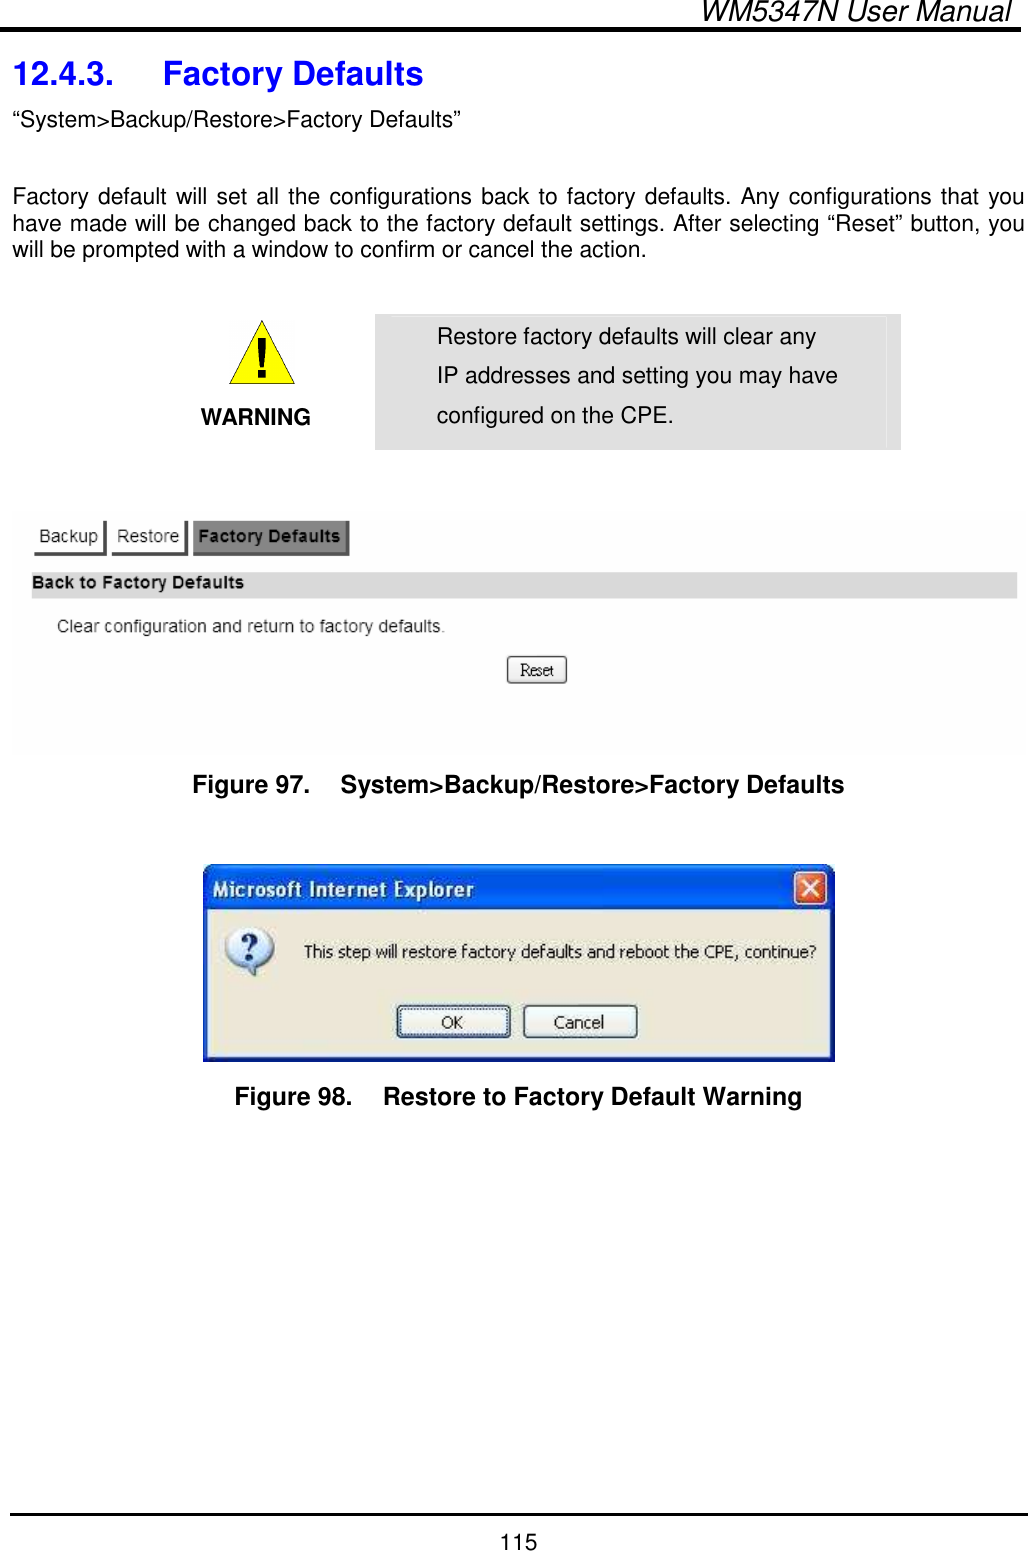  WM5347N User Manual  115 12.4.3.  Factory Defaults “System&gt;Backup/Restore&gt;Factory Defaults”  Factory default will set all the configurations back to factory defaults. Any configurations that you have made will be changed back to the factory default settings. After selecting “Reset” button, you will be prompted with a window to confirm or cancel the action.   WARNING Restore factory defaults will clear any IP addresses and setting you may have configured on the CPE.   Figure 97.   System&gt;Backup/Restore&gt;Factory Defaults     Figure 98.   Restore to Factory Default Warning  